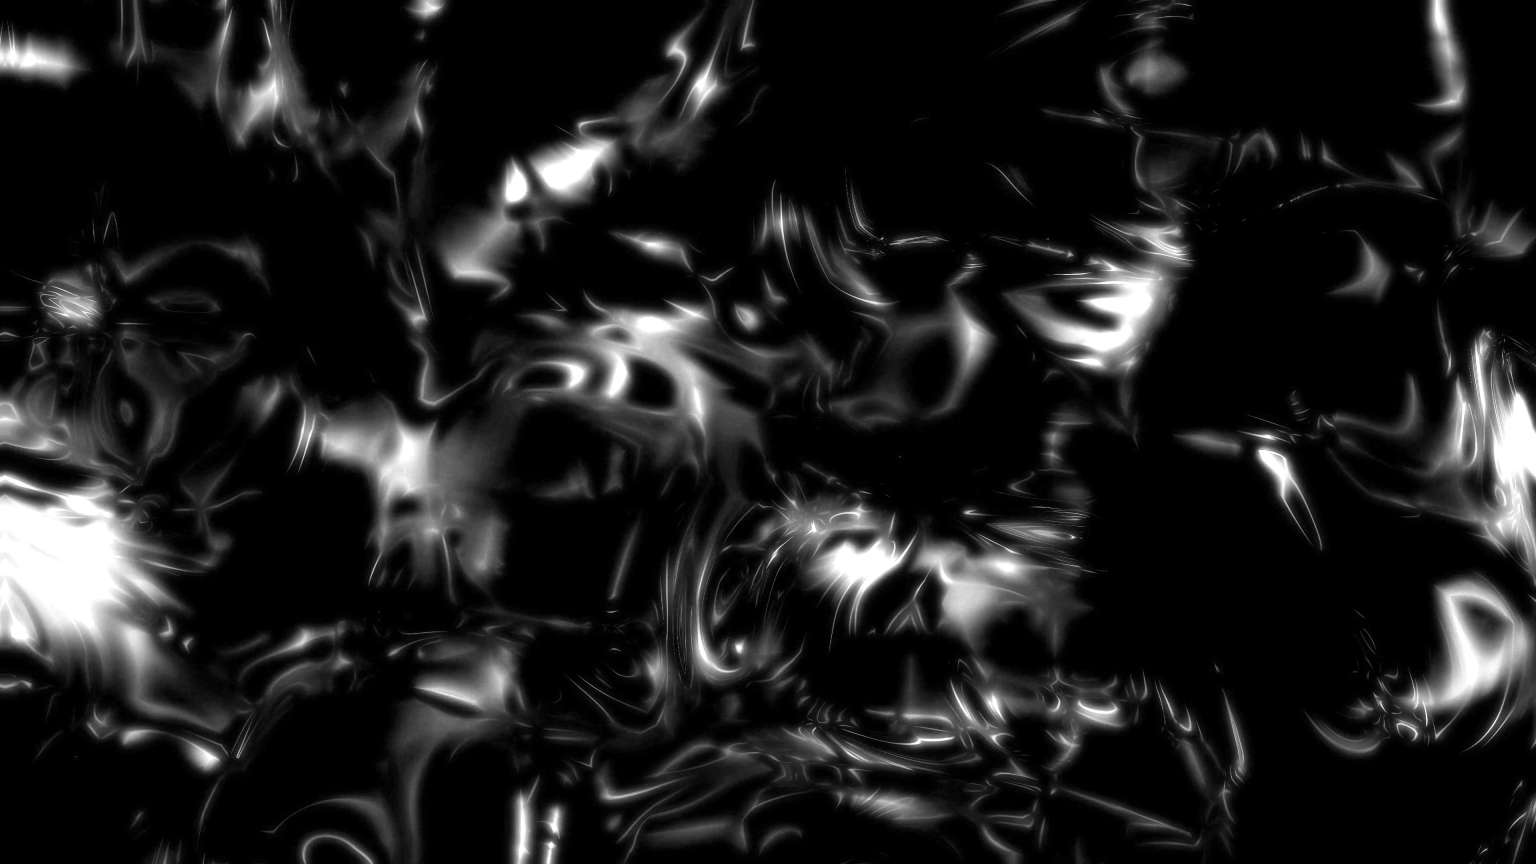 4K Black & White Abstract Looped Screensaver || Free To Use UHD Motion Background || FREE DOWNLOAD